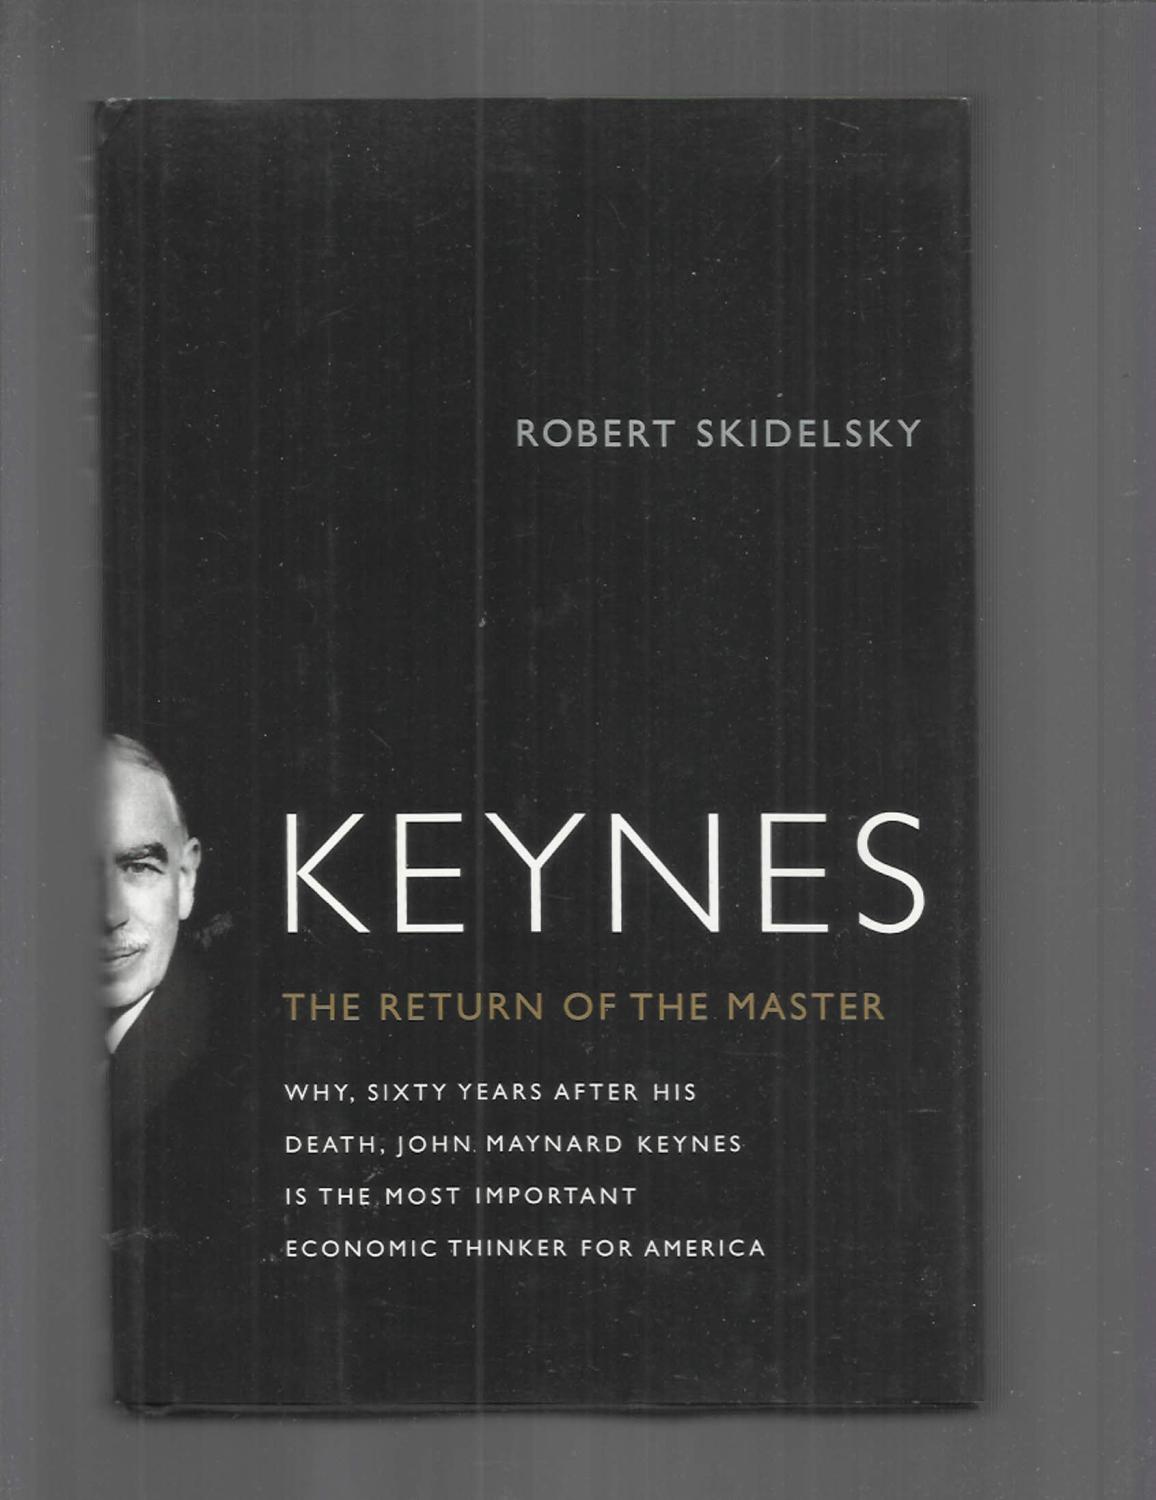 KEYNES: The Return Of The Master ~ Why, Sixty Years After His Death, John Maynard Keynes Is The Most Important Economic Thinker For America - Skidelsky, Robert